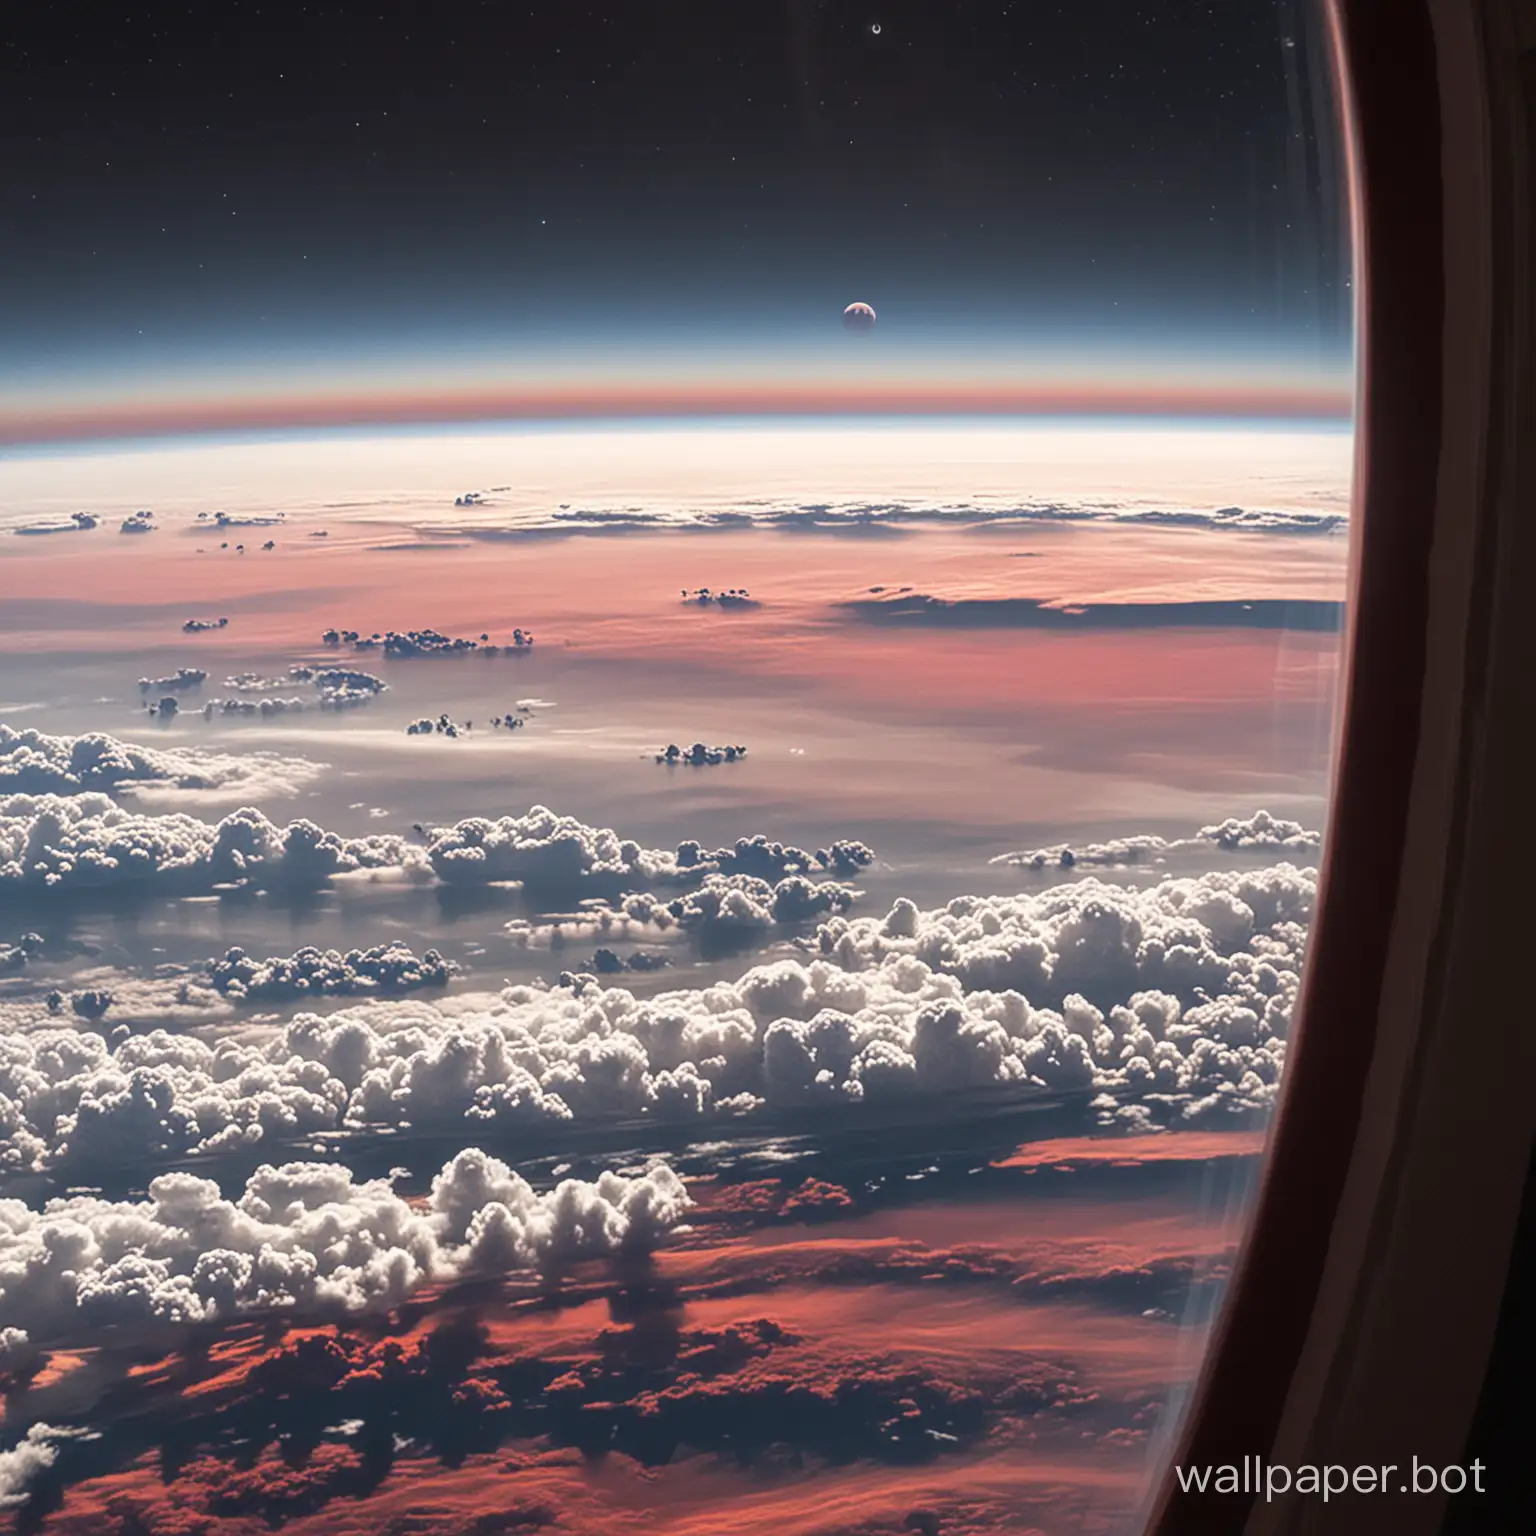 A view of a red and white planet with clouds across the planet's surface from a large window